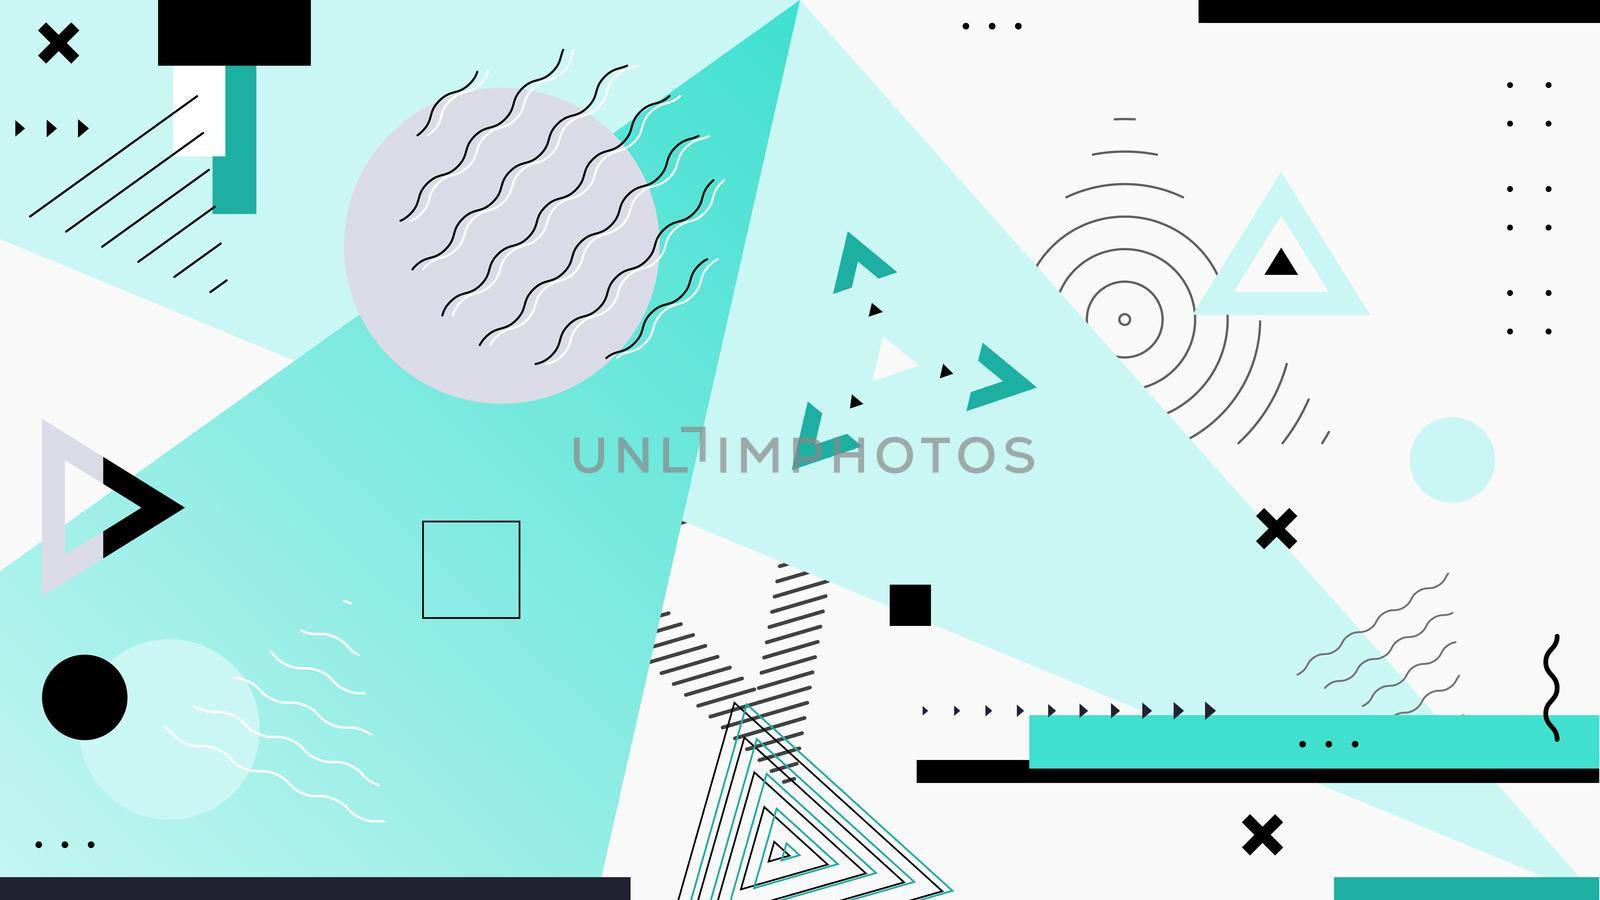 Dark vector geometric backround. Abstract design styled vintage trends 80-s. Minimalistic background by Yarkee